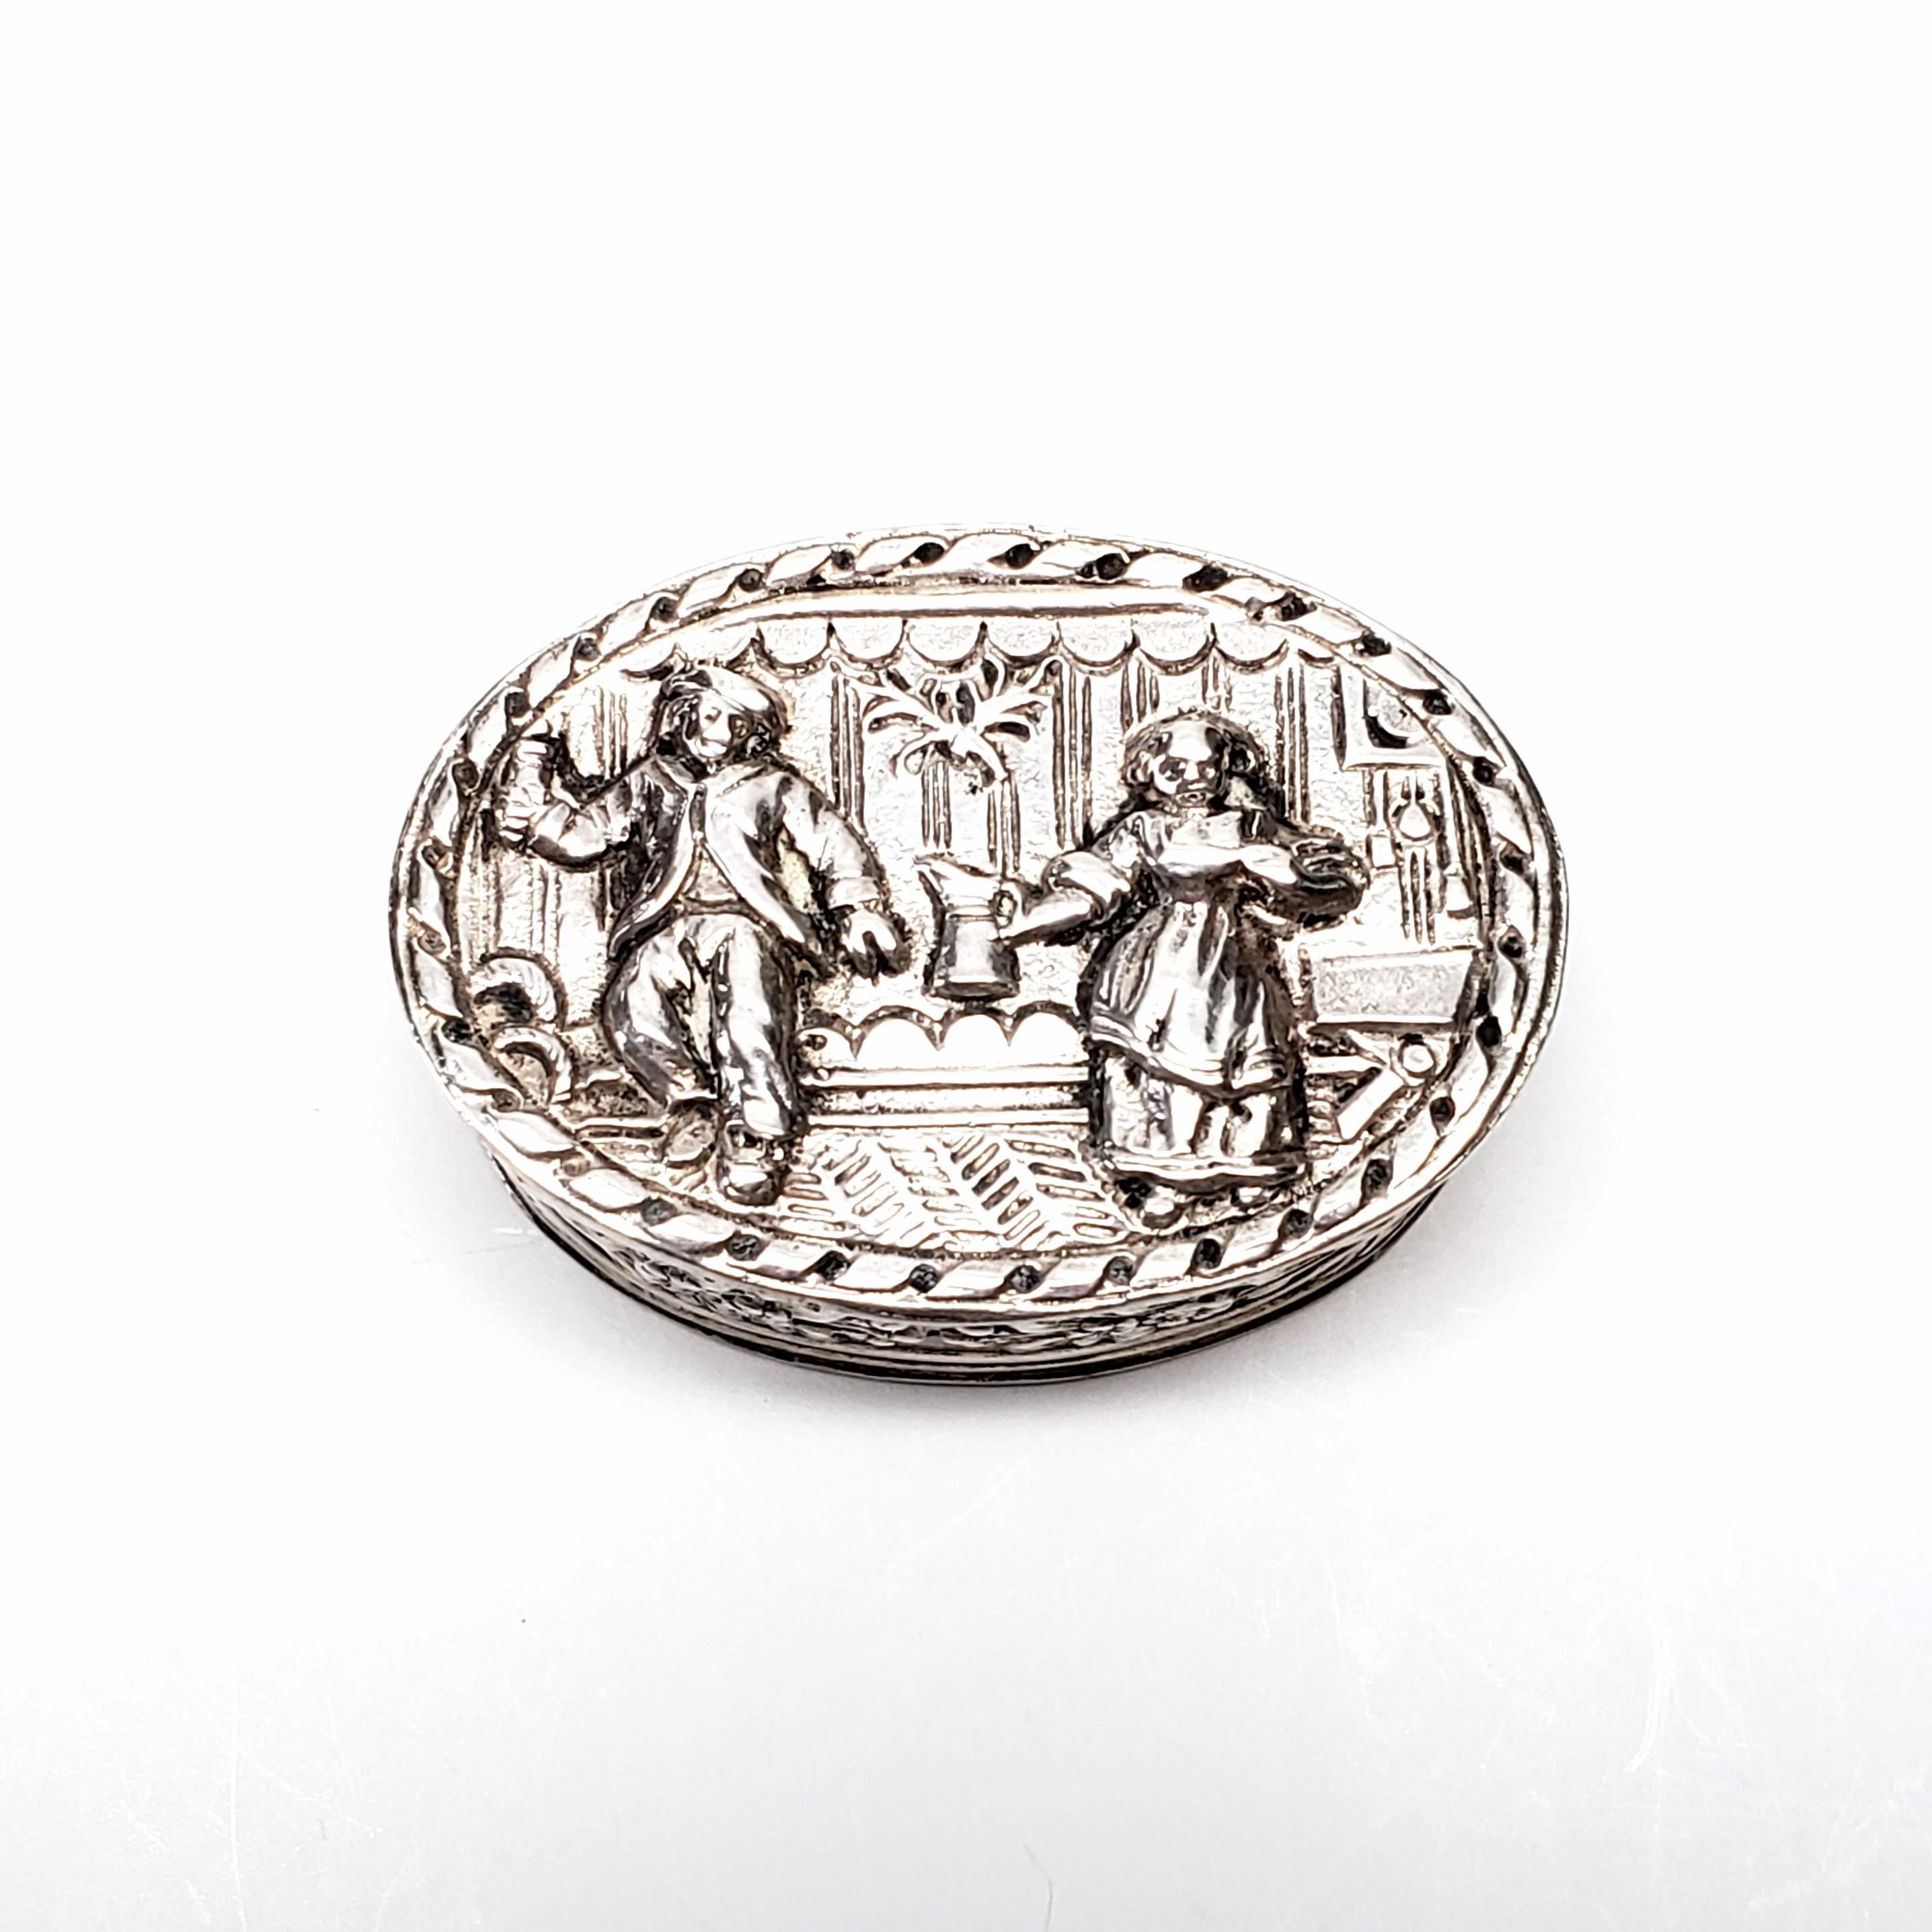 Antique Dutch 800 silver hinged oval pill box.

This is a beautiful example of repousse silver box. The lid depicts a tavern scene of dancing and drinking. Ornate floral design all around the sides.

Measures 1 1/8